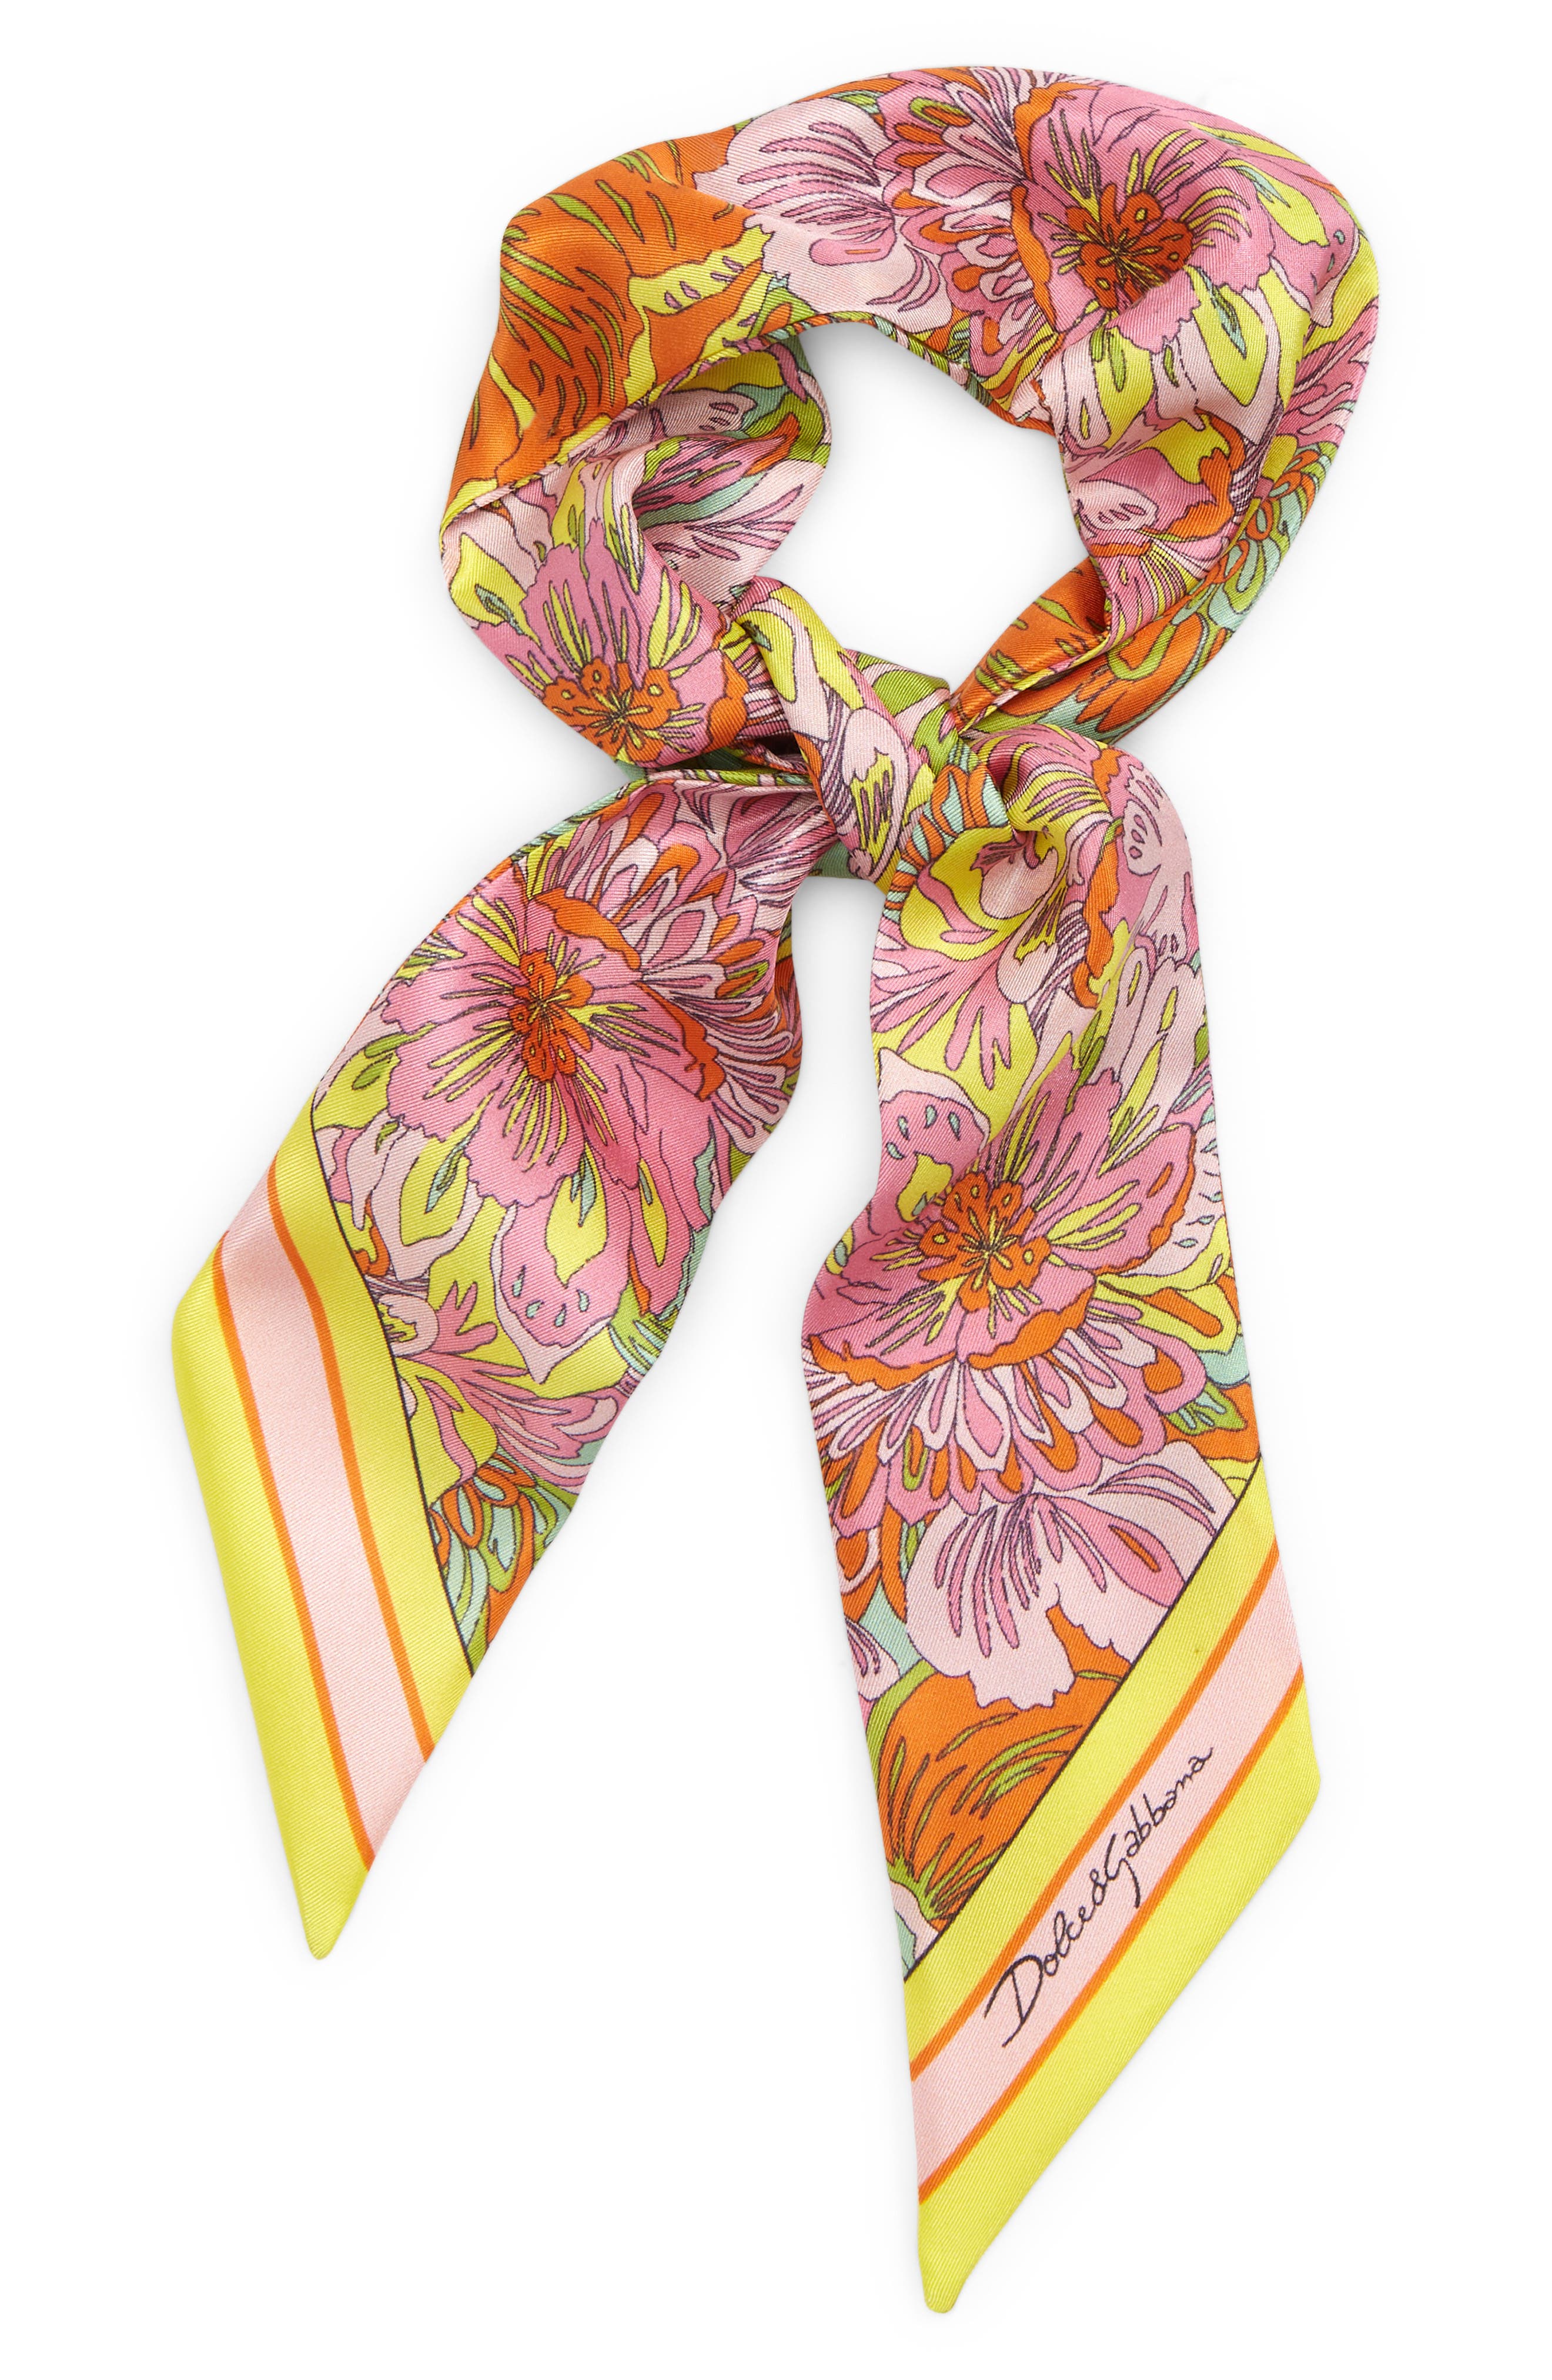 Dolce & Gabbana Floral Silk Twill Scarf in Multi at Nordstrom